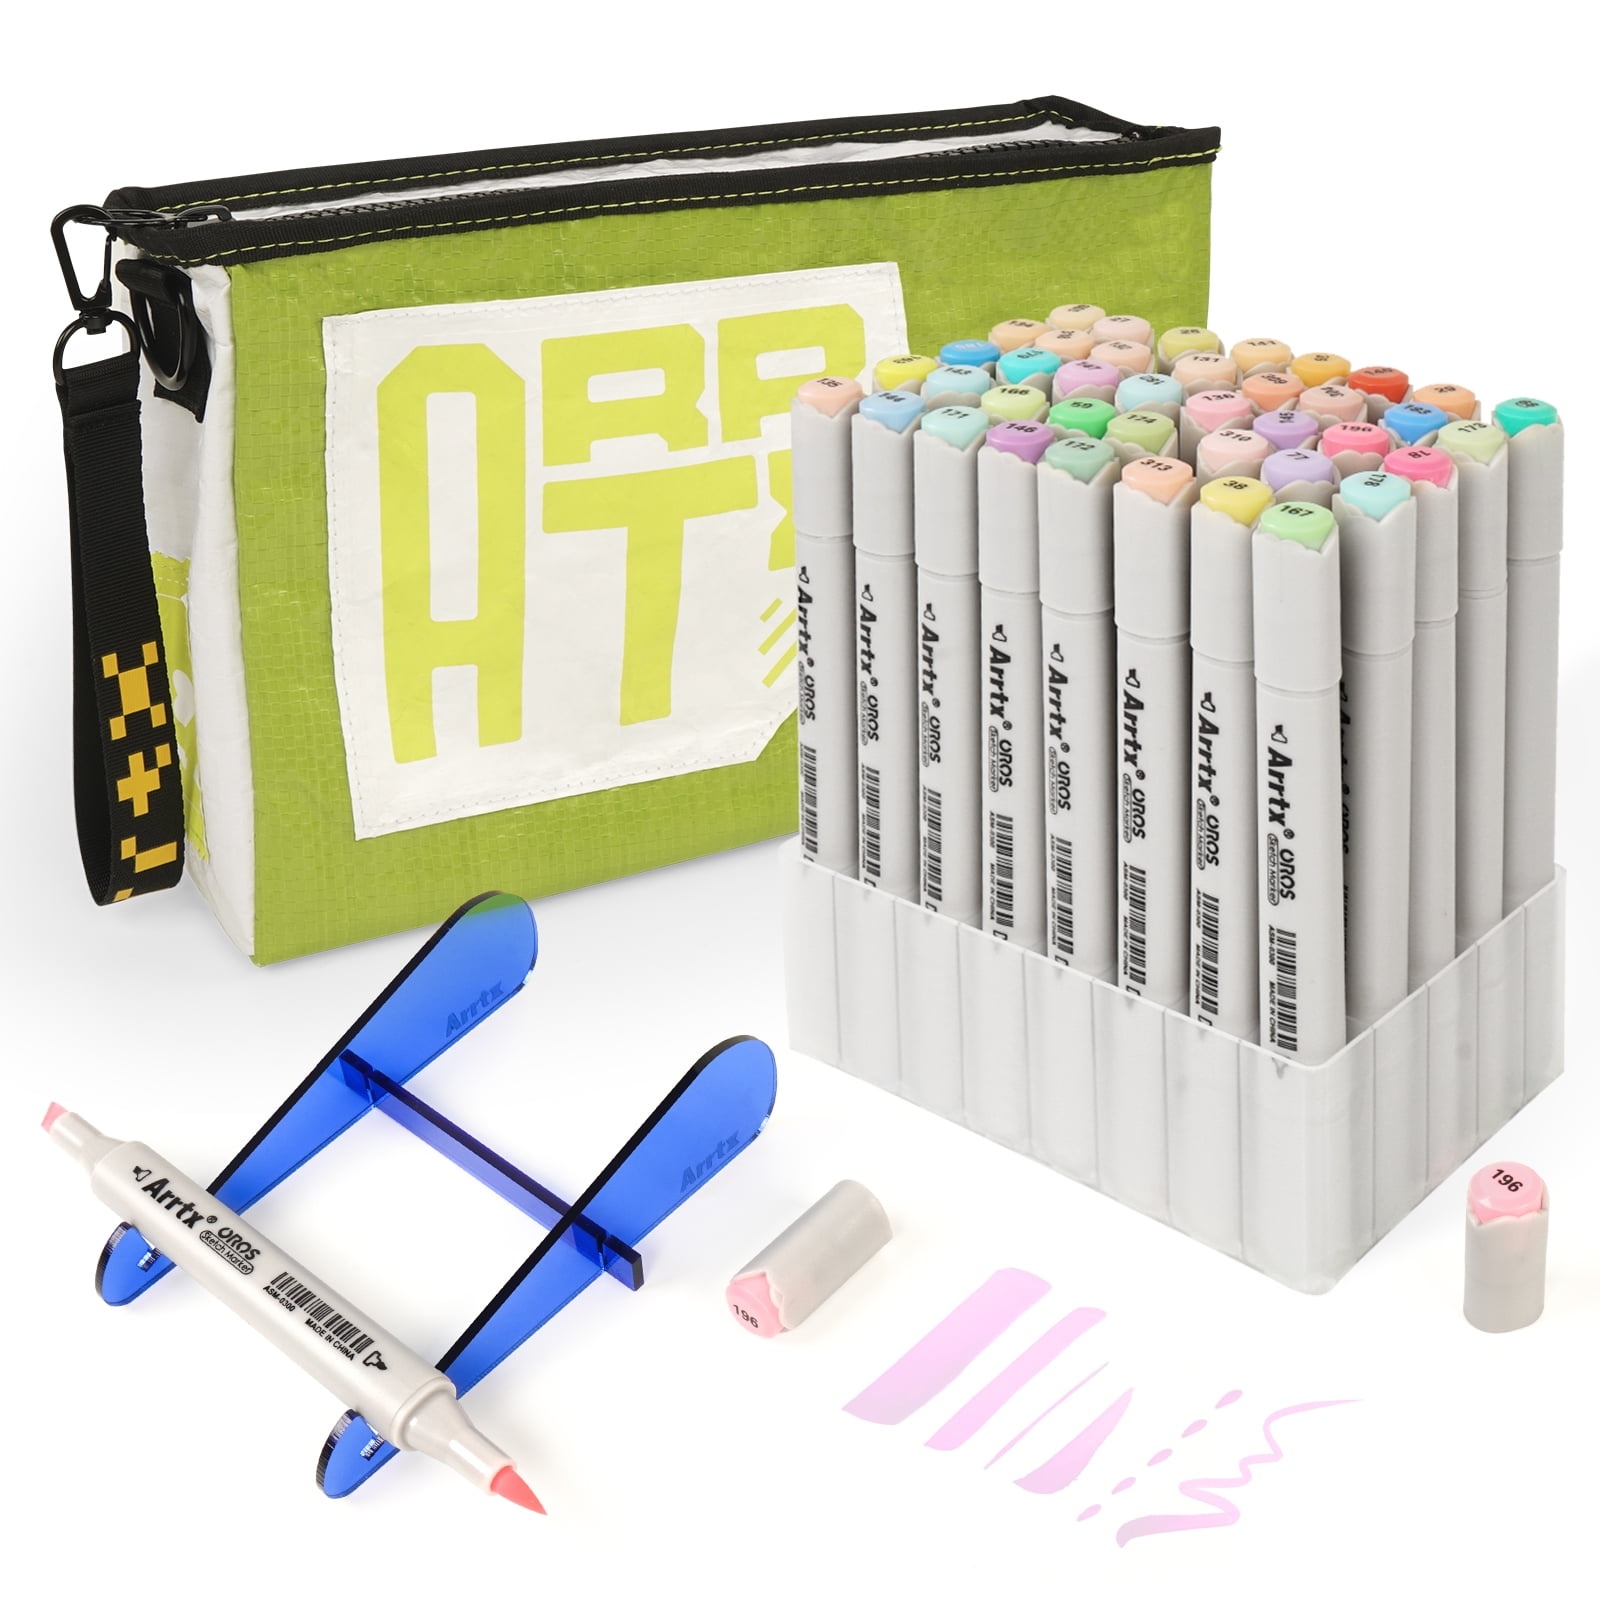 Arrtx ALP New Release 40 Pastel Colors Marker Set, Fine and Chisel Nibs,  Fresh Colors, Durable Ink for Painting, Illustration, A - AliExpress